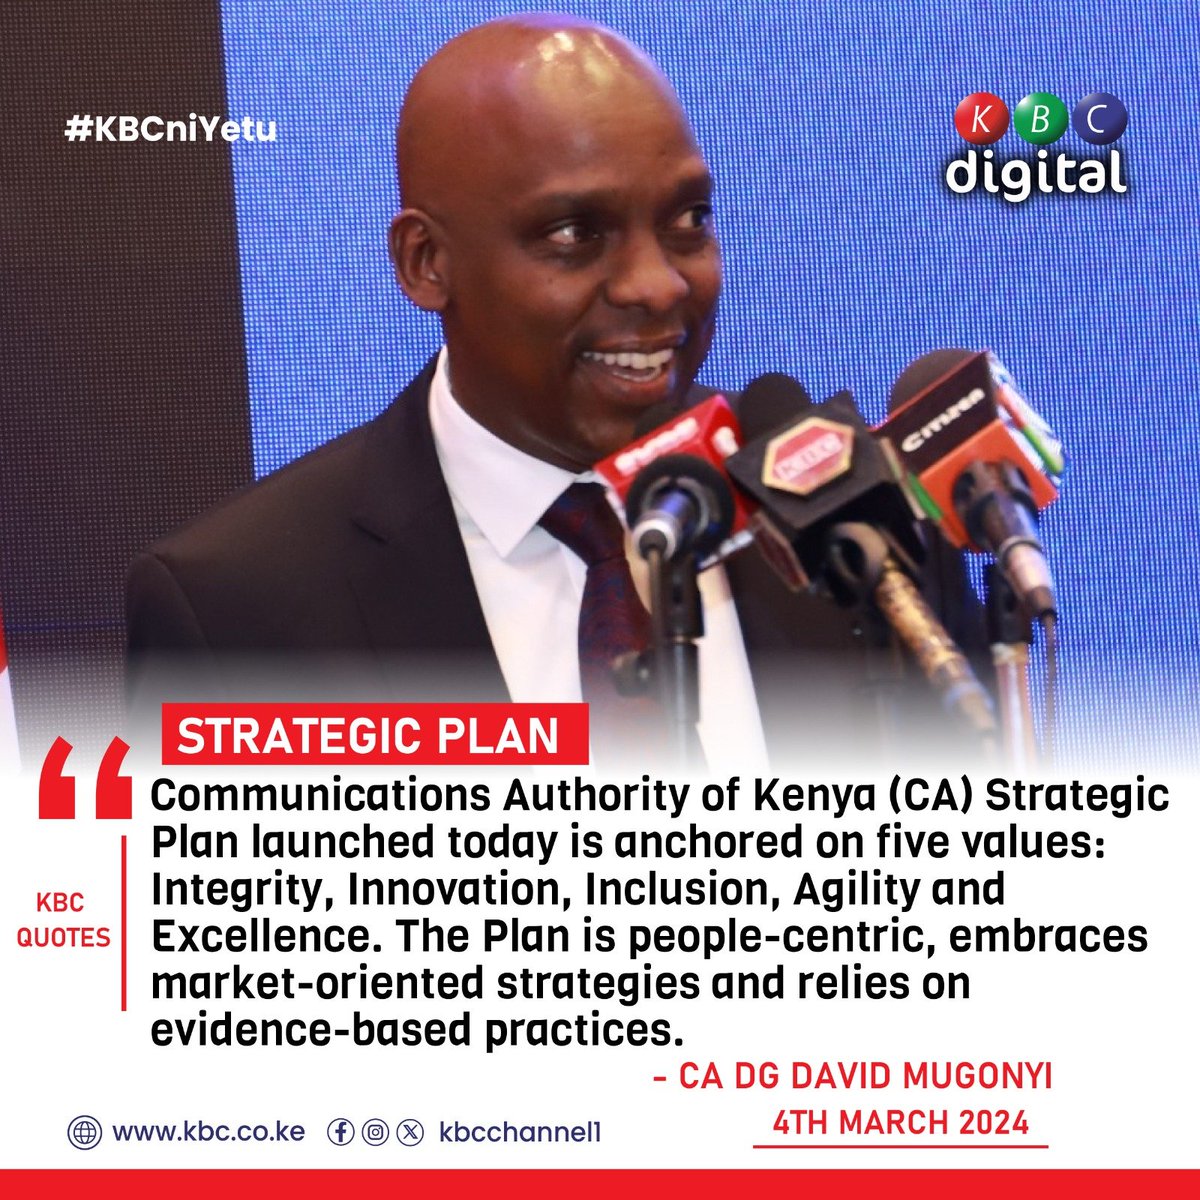 'Communications Authority of Kenya (CA) Strategic Plan launched today is anchored on five values: Integrity, Innovation, Inclusion, Agility and Excellence.' - CA DG David Mugonyi #KBCniYetu ^RO